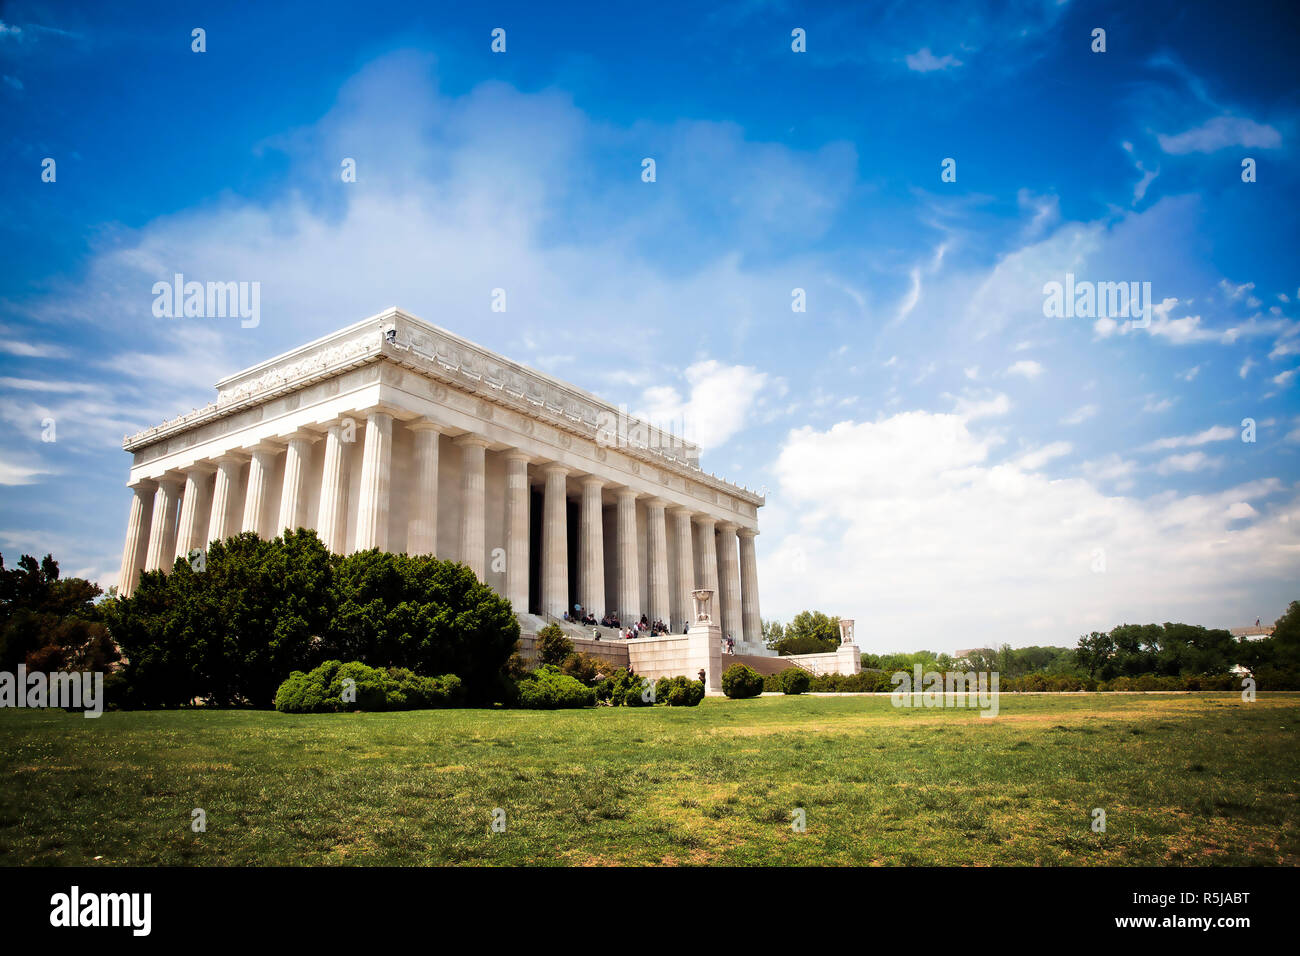 The Lincoln Memorial on the National Mall, Washington, DC. Stock Photo